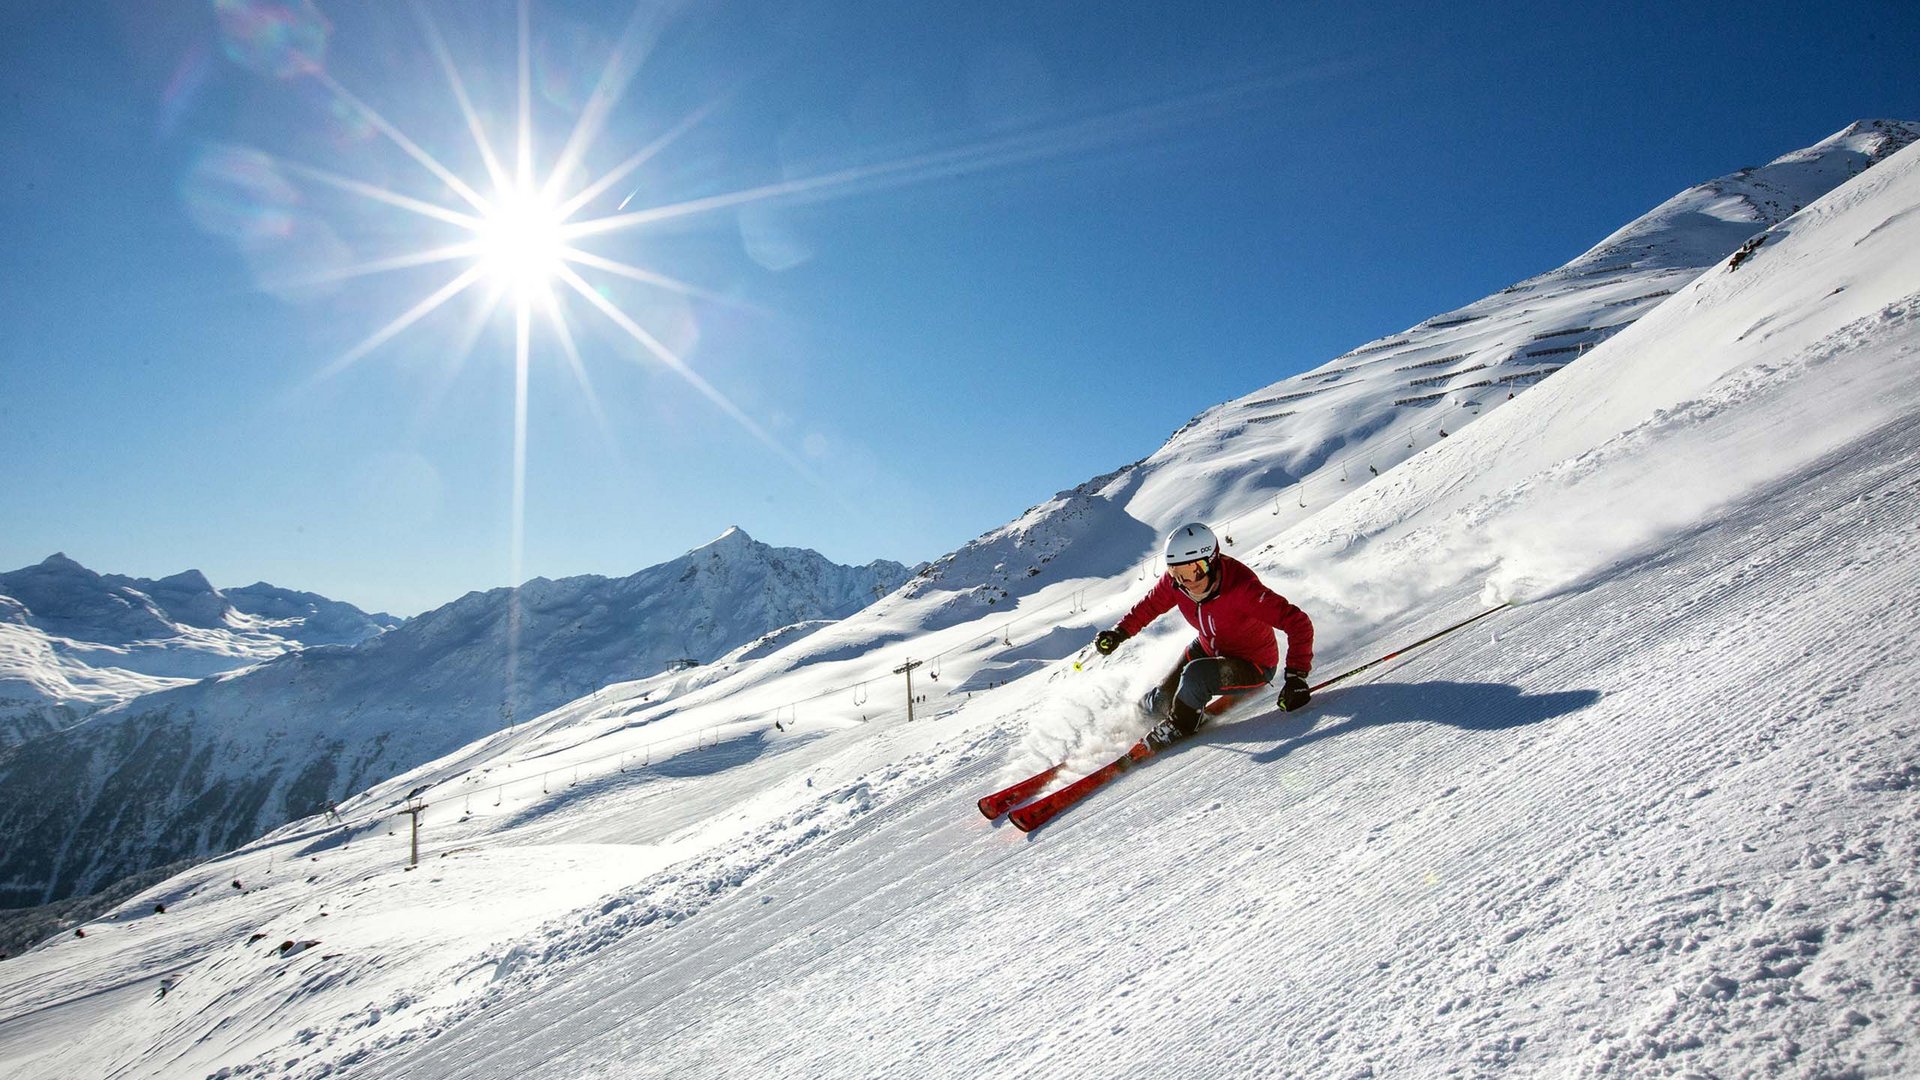 Skiing holiday in Sölden? Come to Hotel Sunny!